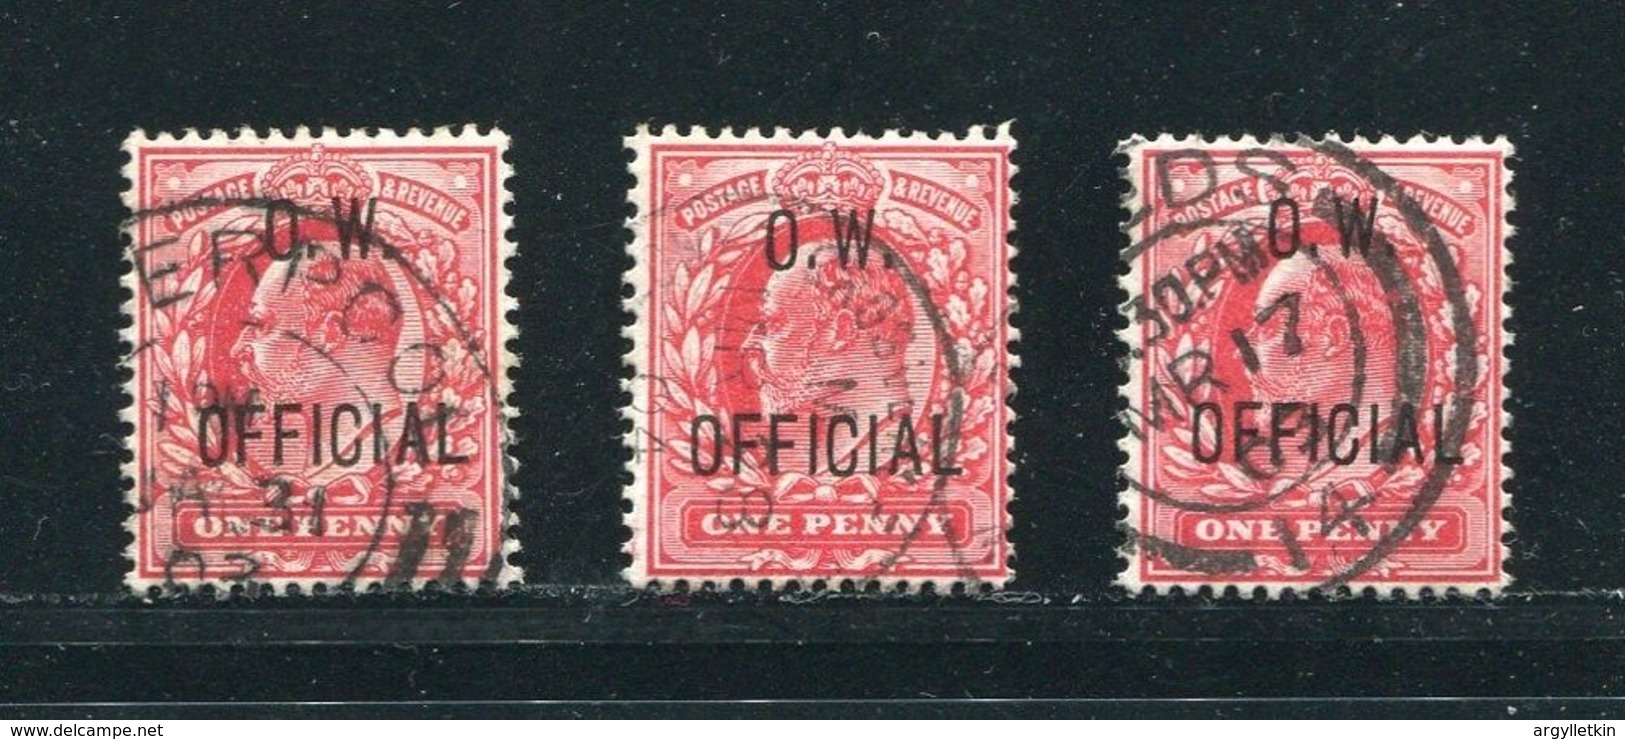 GB KING EDWARD 7TH OFFICIAL STAMPS O.W. OFFICIAL LEEDS LIVERPOOL - Non Classés